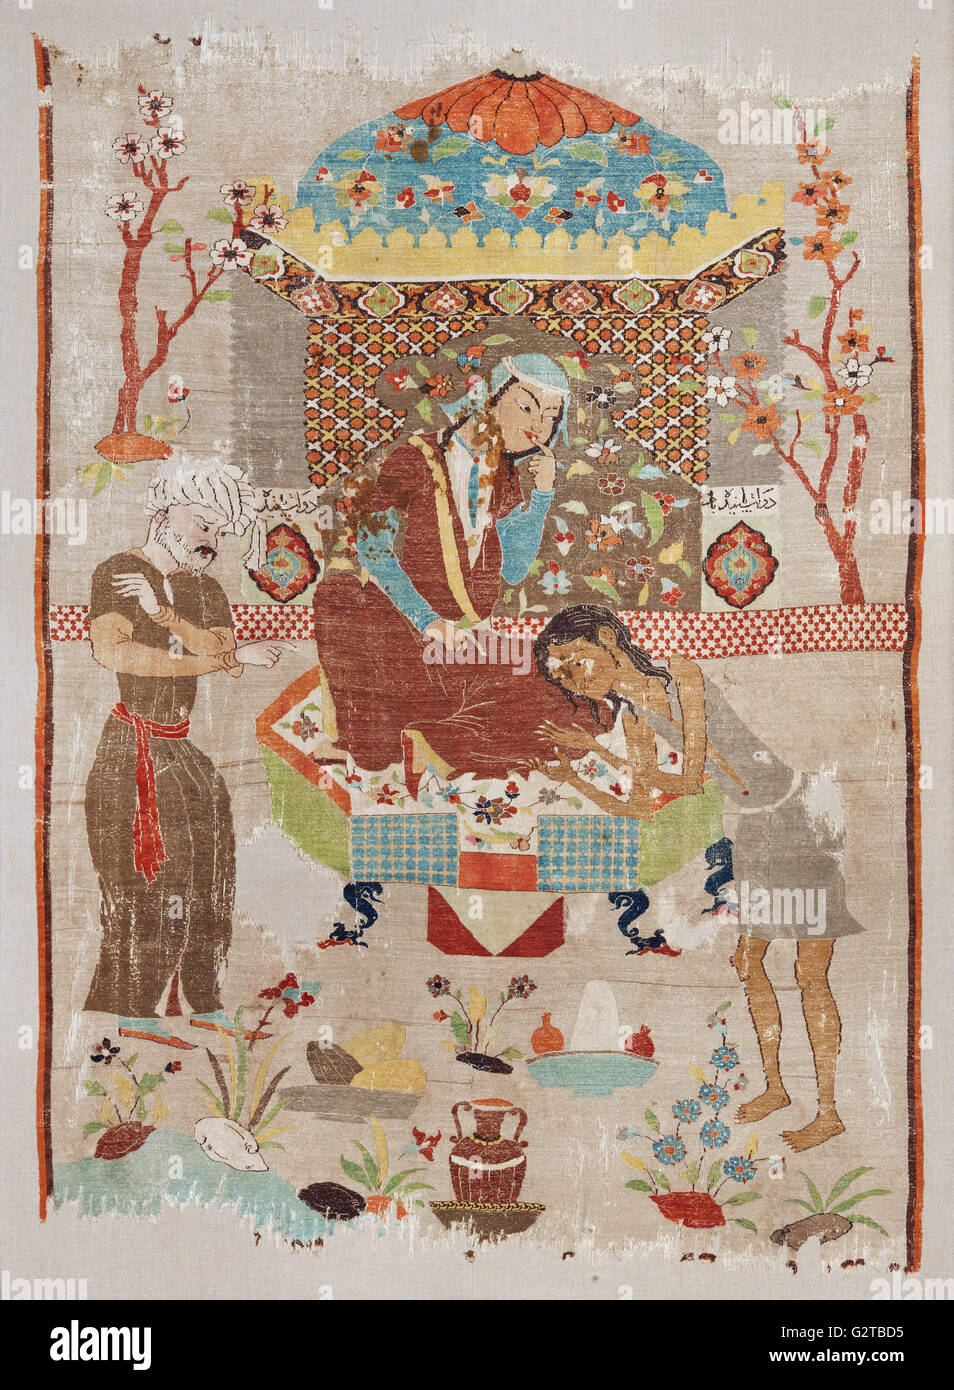 Unknown, Iran, 16th or 16th Century - Silk Tapestry Depicting the story of Leila and Majnu - Stock Photo